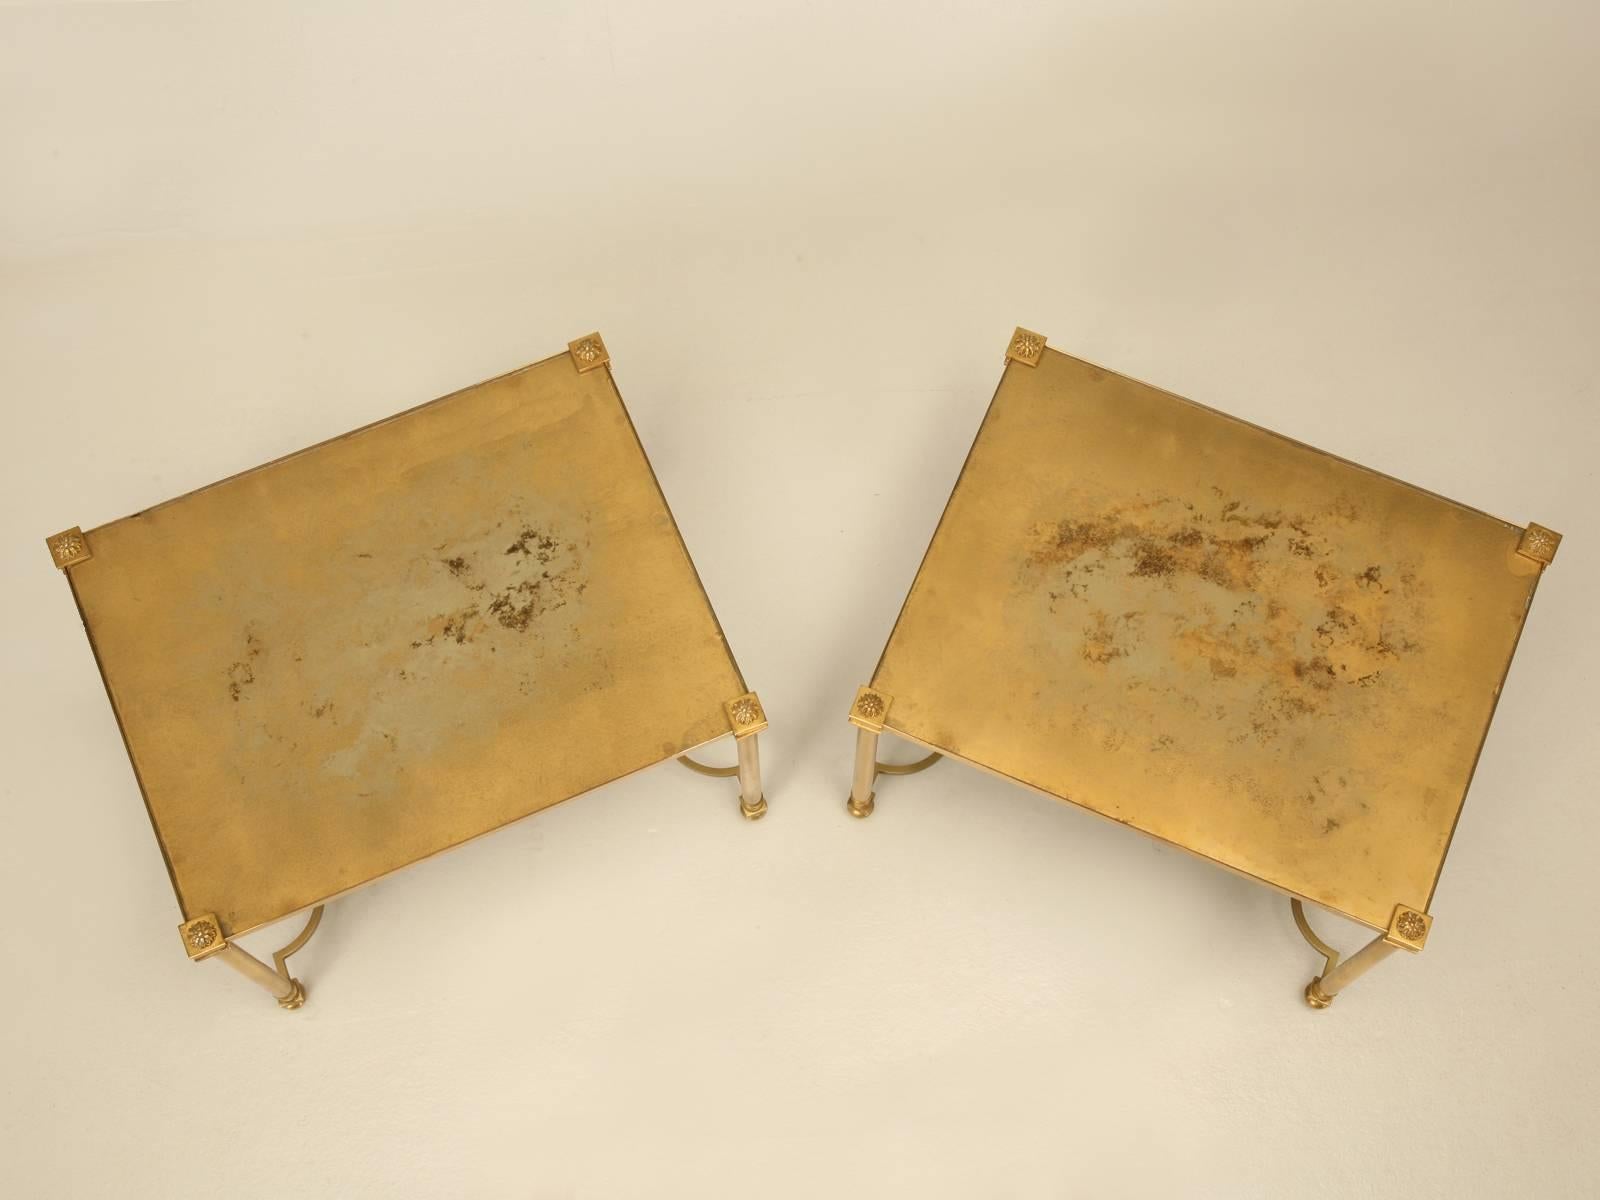 Pair of French Mid-Century Modern petite brass coffee tables in the style of Baguès, with a distressed gold patina glass top. These would also function just as easily as end tables that are always so difficult to find a good looking pair. The